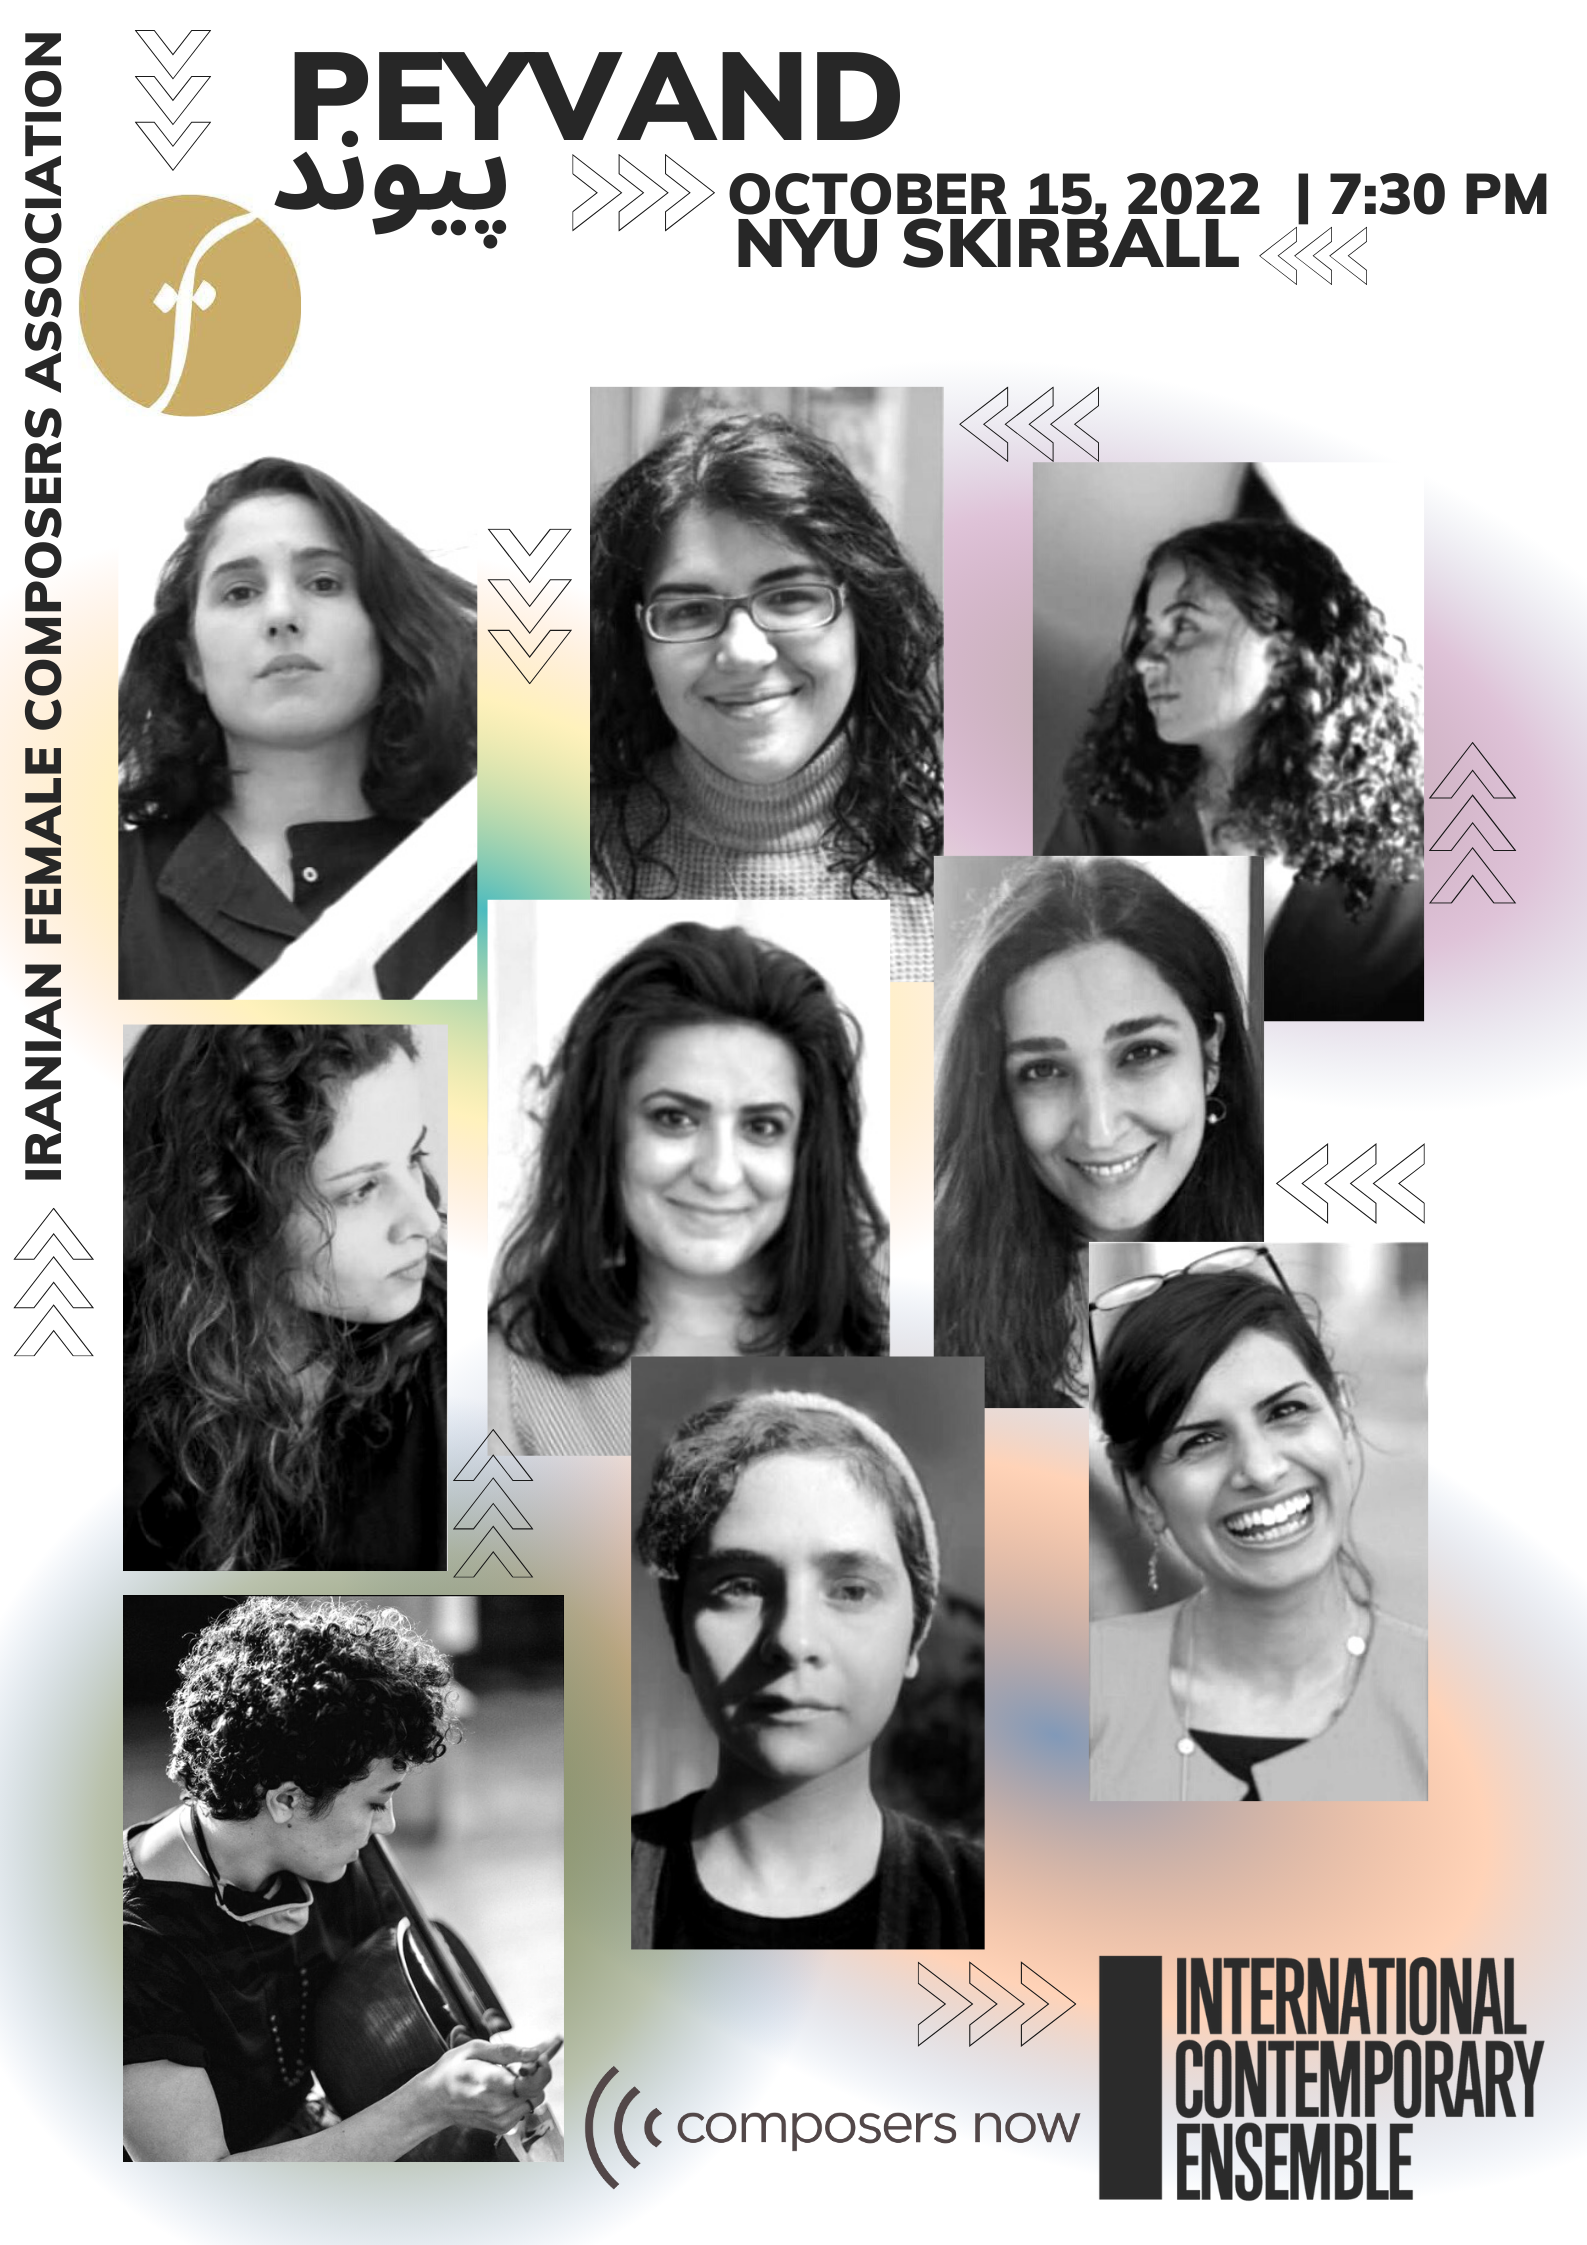 Peyvand, October 15, 2022 at NYU Skirball, 7:30pm. Iranian Female Composers Association, International Contemporary Ensemble & Composers Now